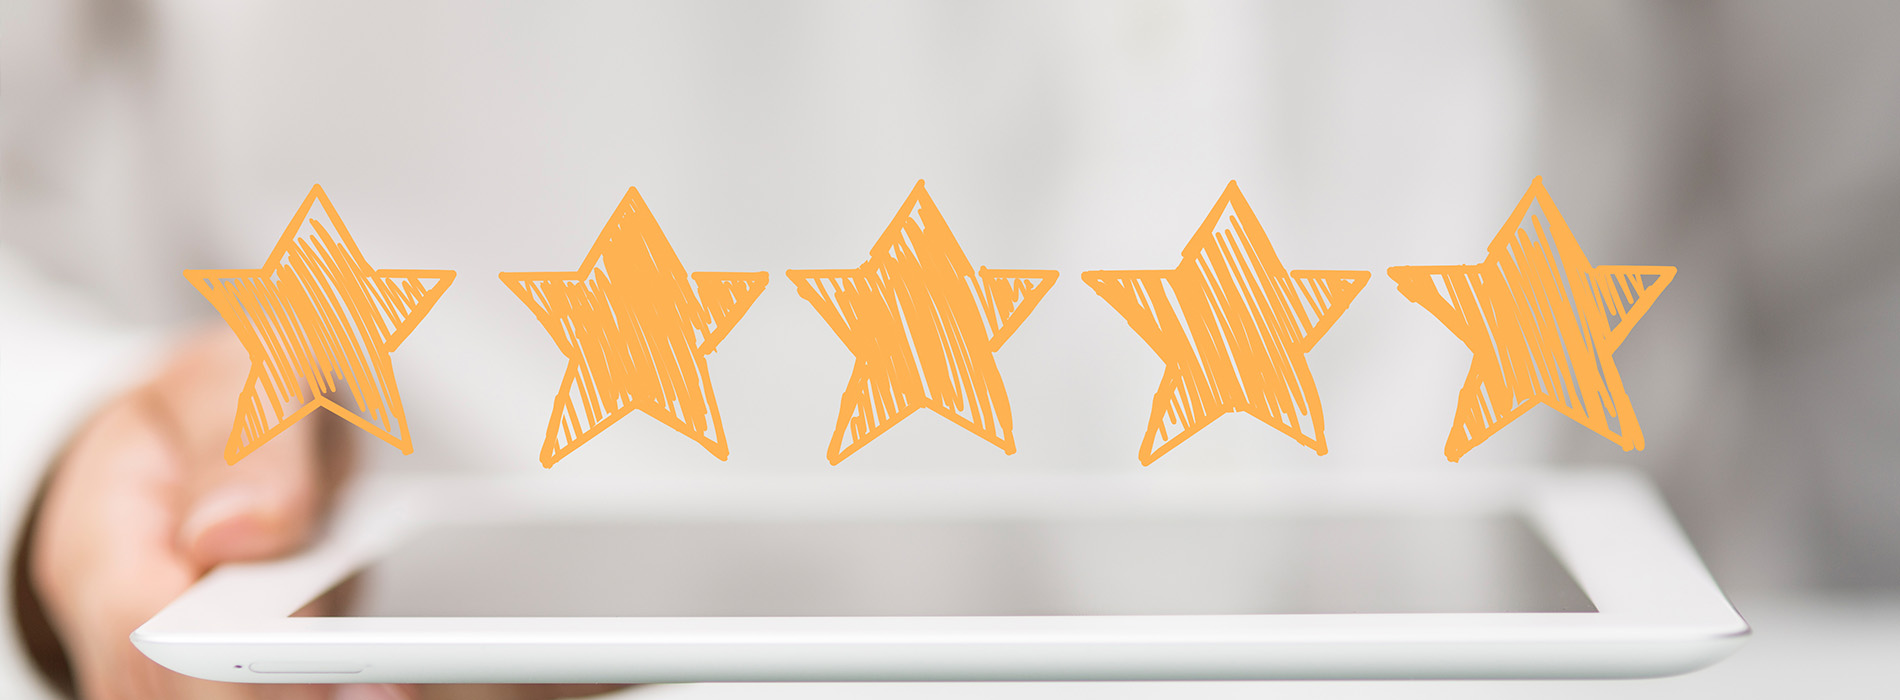 This is an image of a person s hand holding a tablet with a graphic of three gold stars on it, against a blurred background that suggests a positive customer review or rating system.